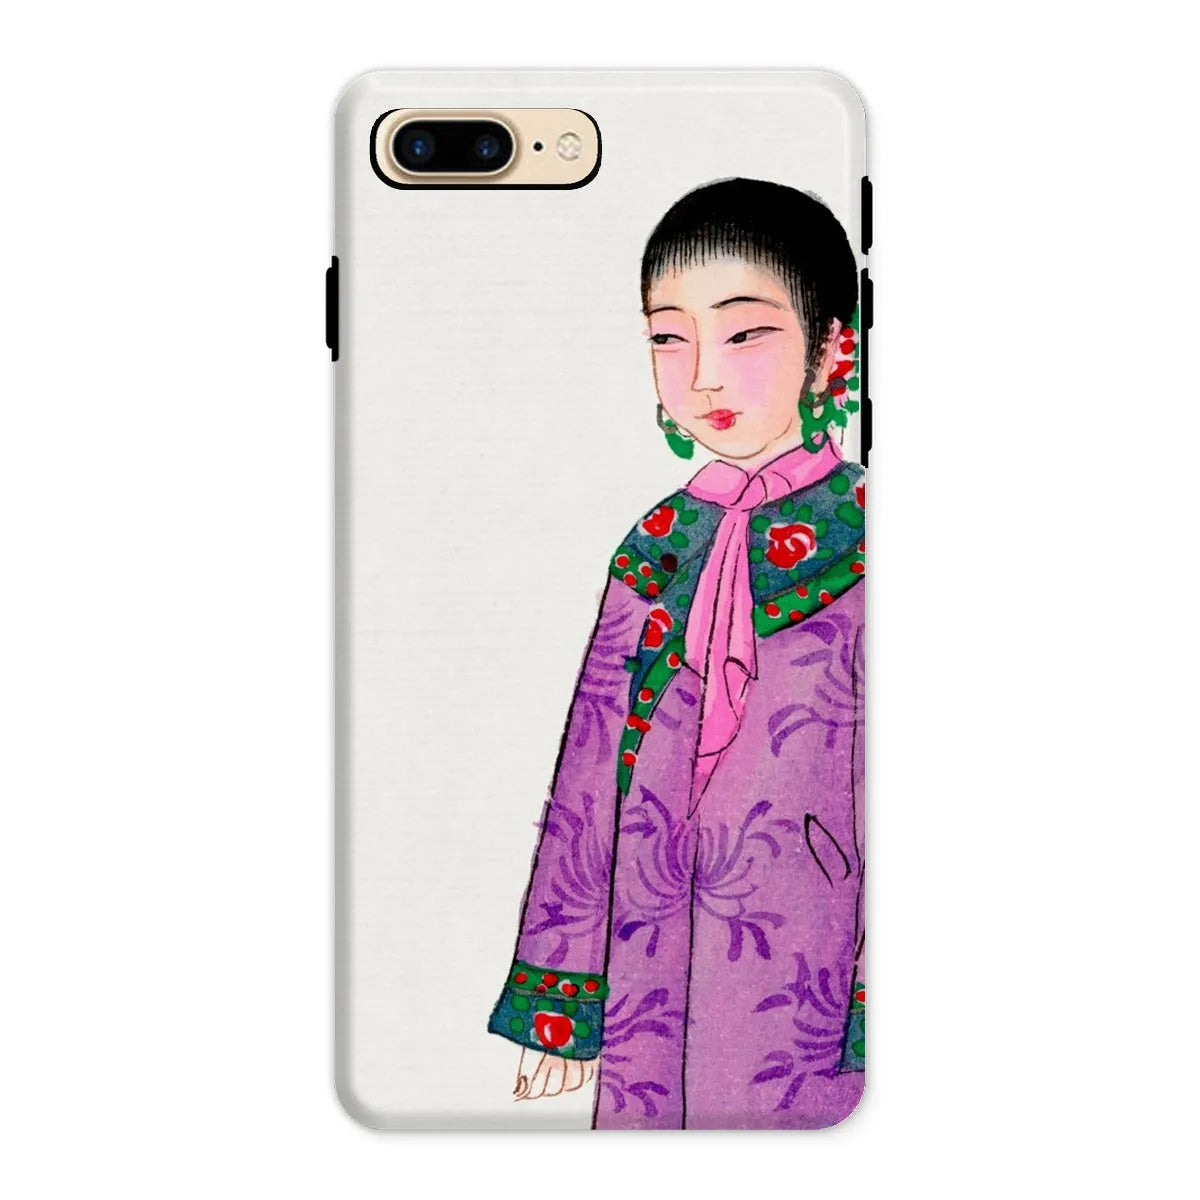 Manchu Noblewoman - Chinese Aesthetic Art Phone Case - Iphone 8 Plus / Matte - Mobile Phone Cases - Aesthetic Art